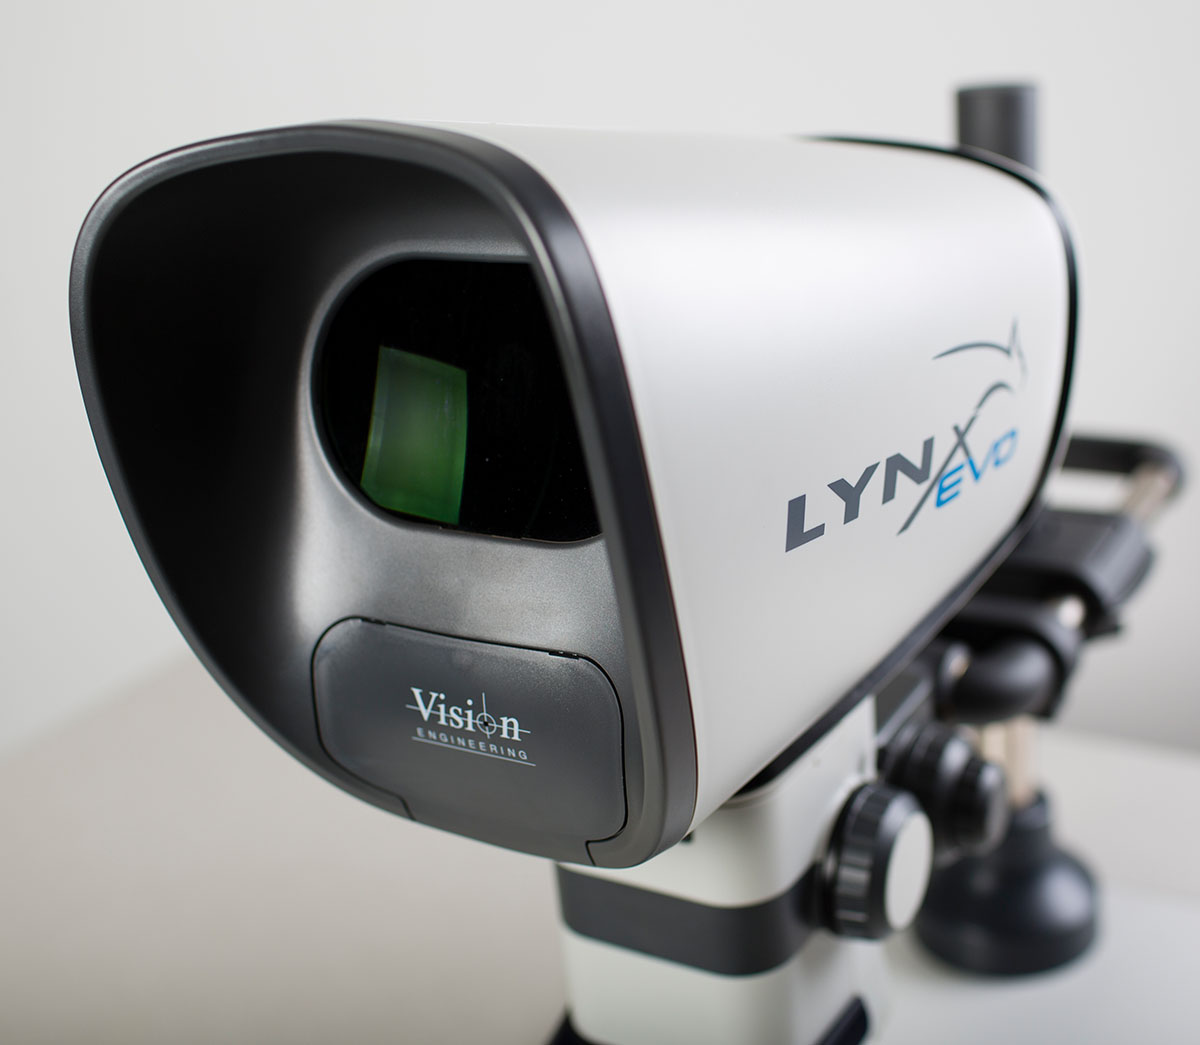 Top part of Lynx EVO eyepiece-less stereo microscope